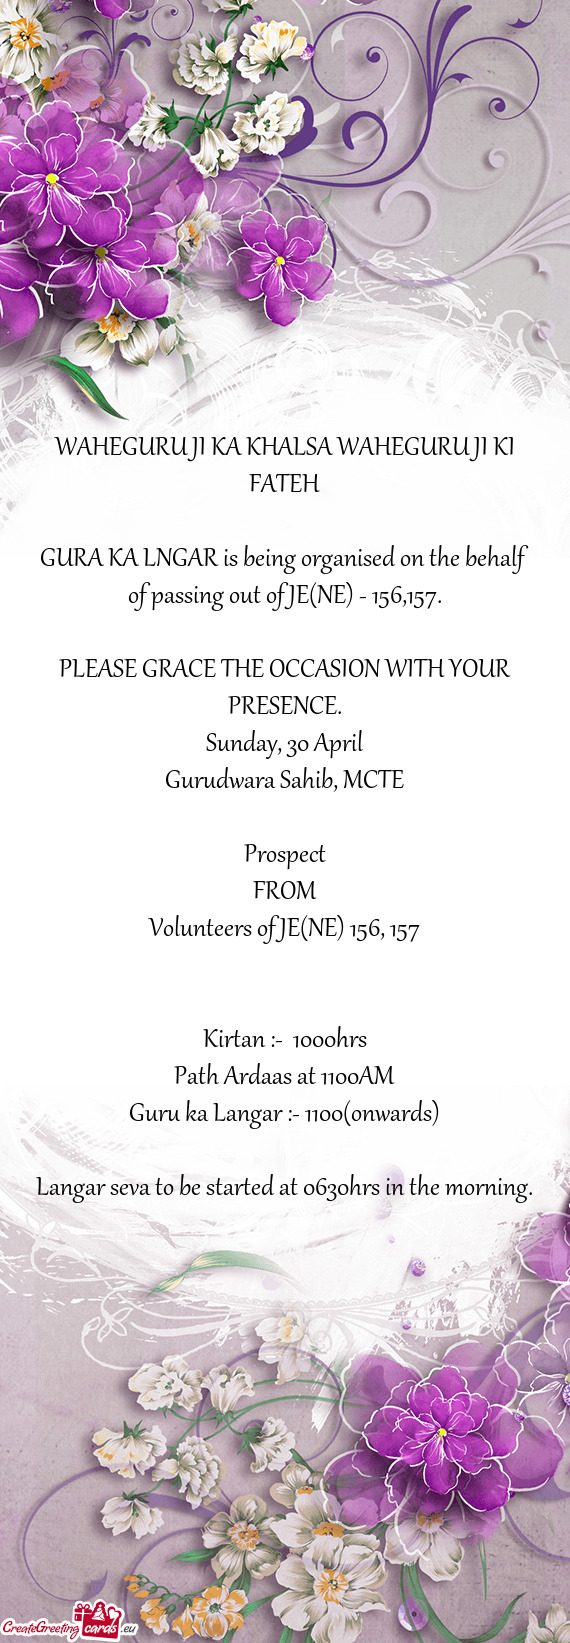 GURA KA LNGAR is being organised on the behalf of passing out of JE(NE) - 156,157